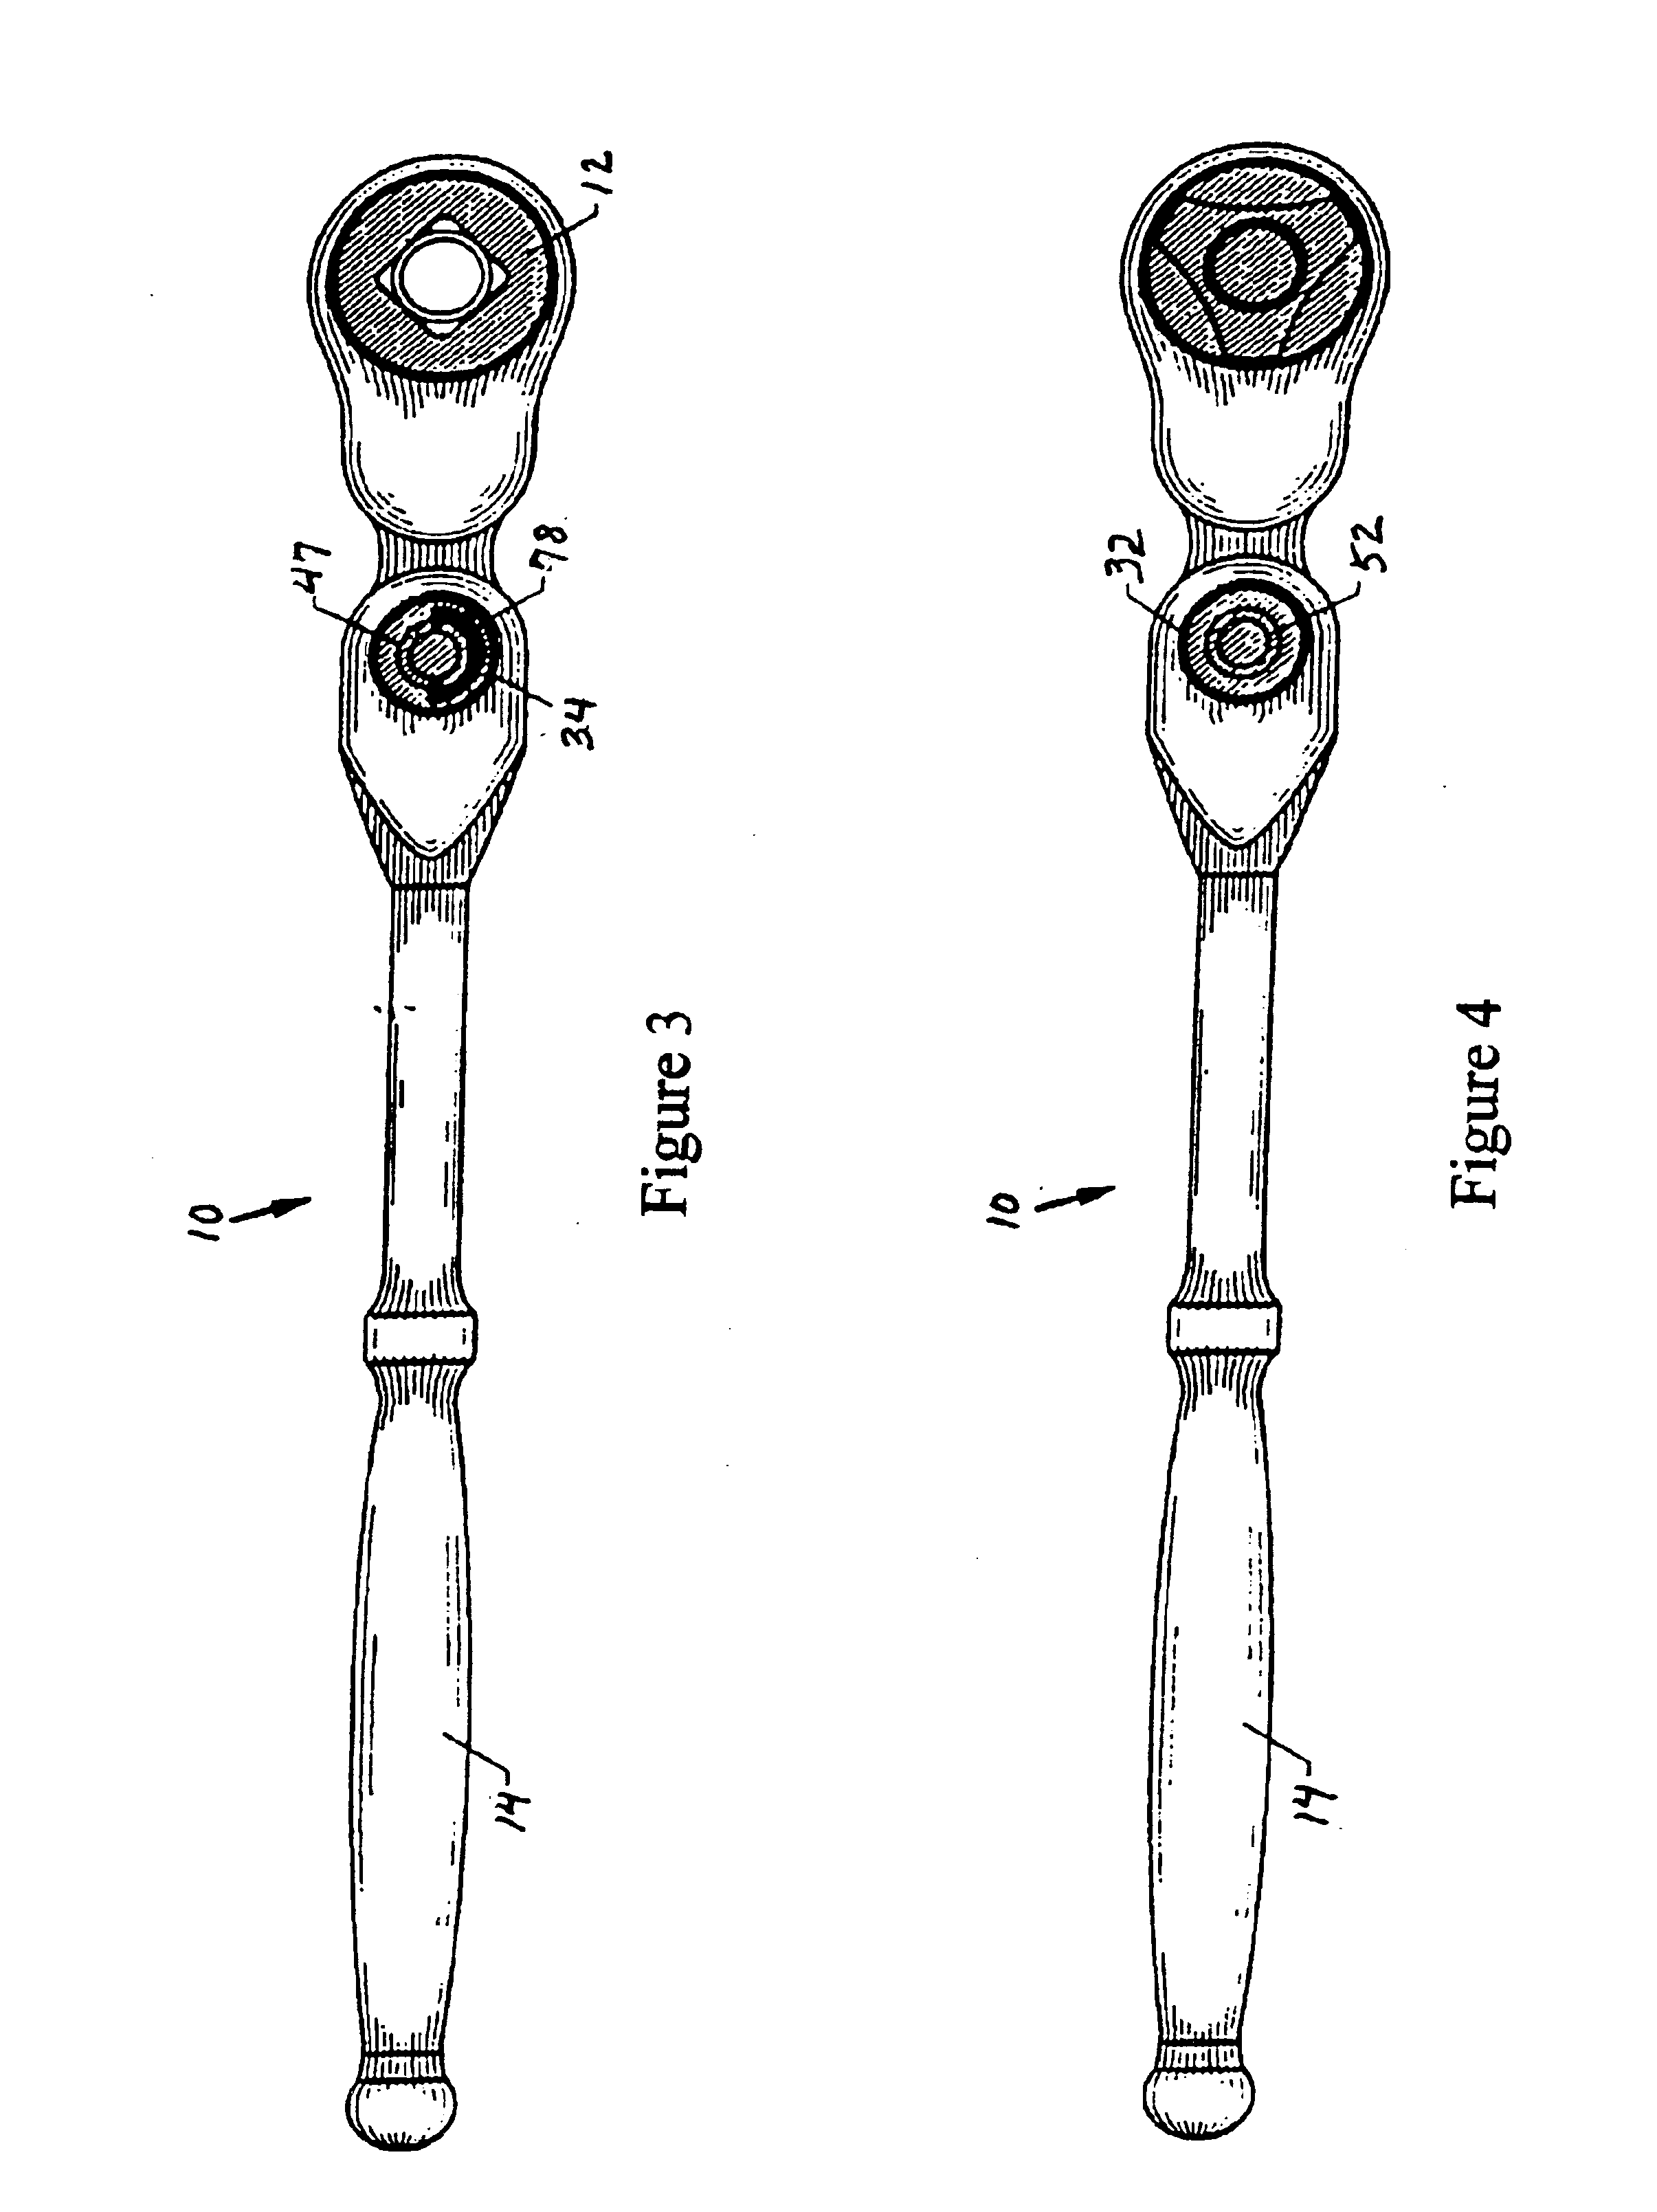 Radial indexing head tool with floating splined pin